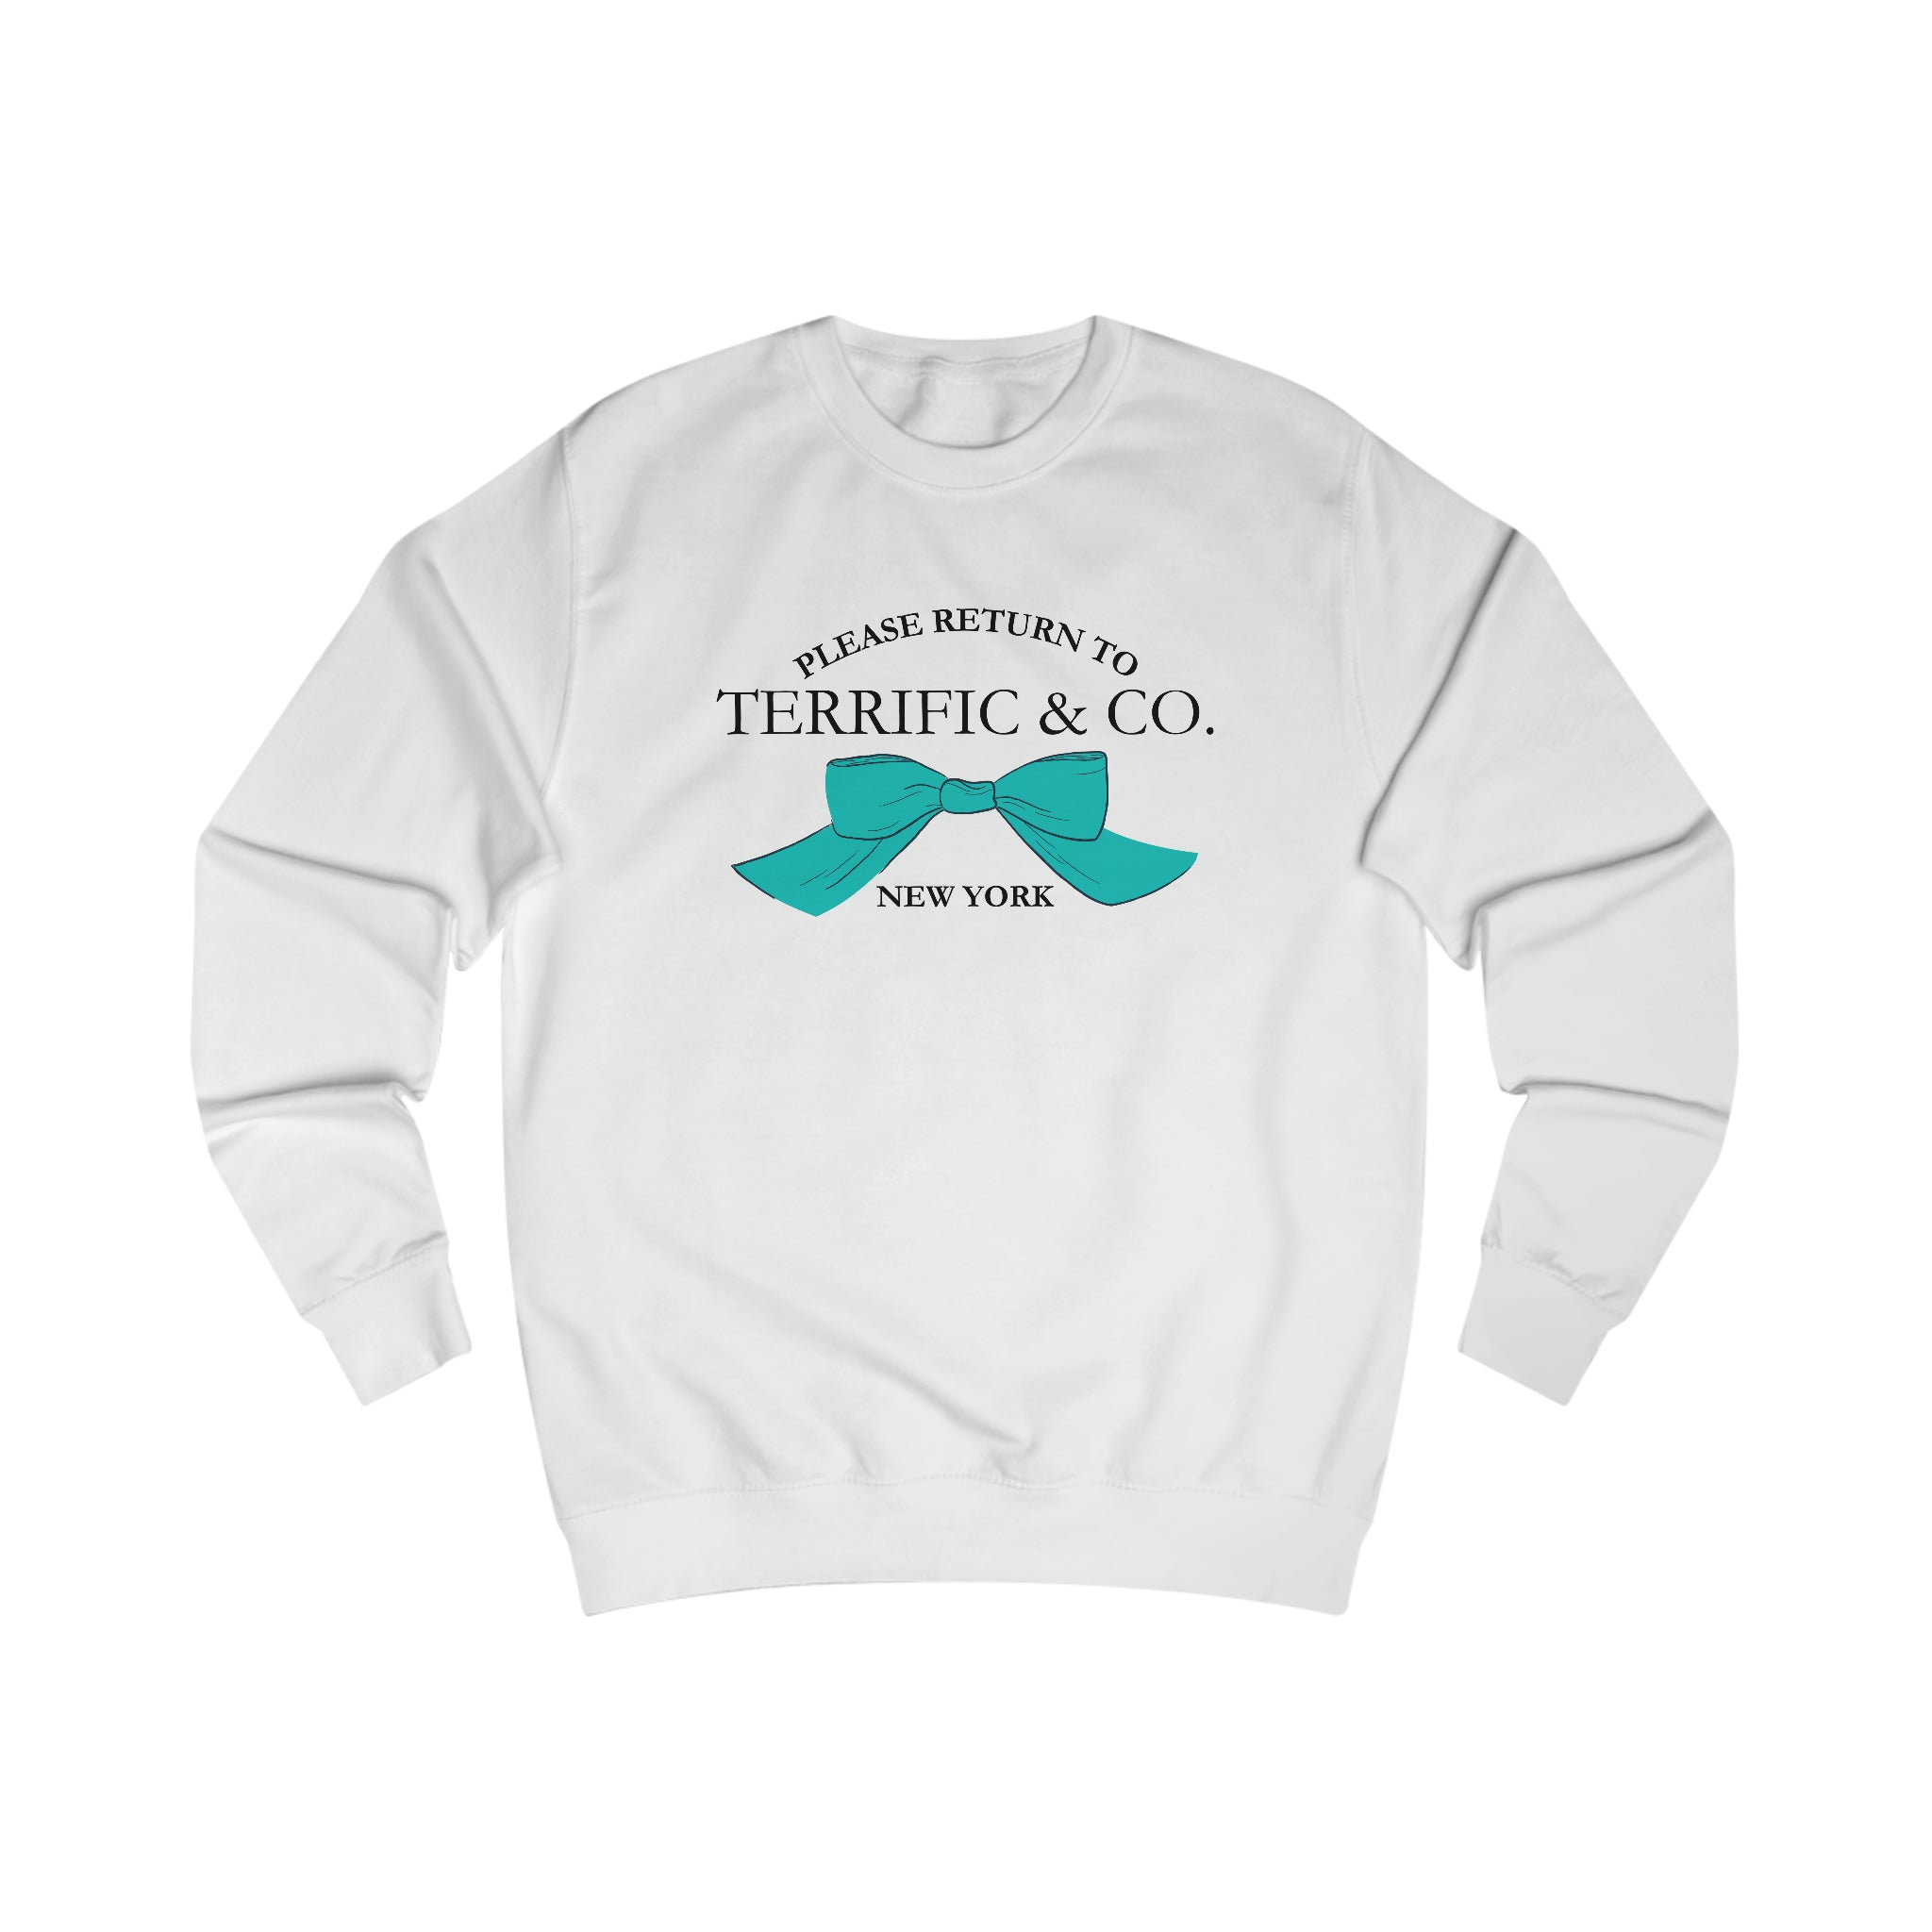 Please Return To Terrific and Co. (Bow) Designer inspired Relaxed Fit Unisex Sweatshirt Sweatshirt Arctic-White-2XL The Middle Aged Groove